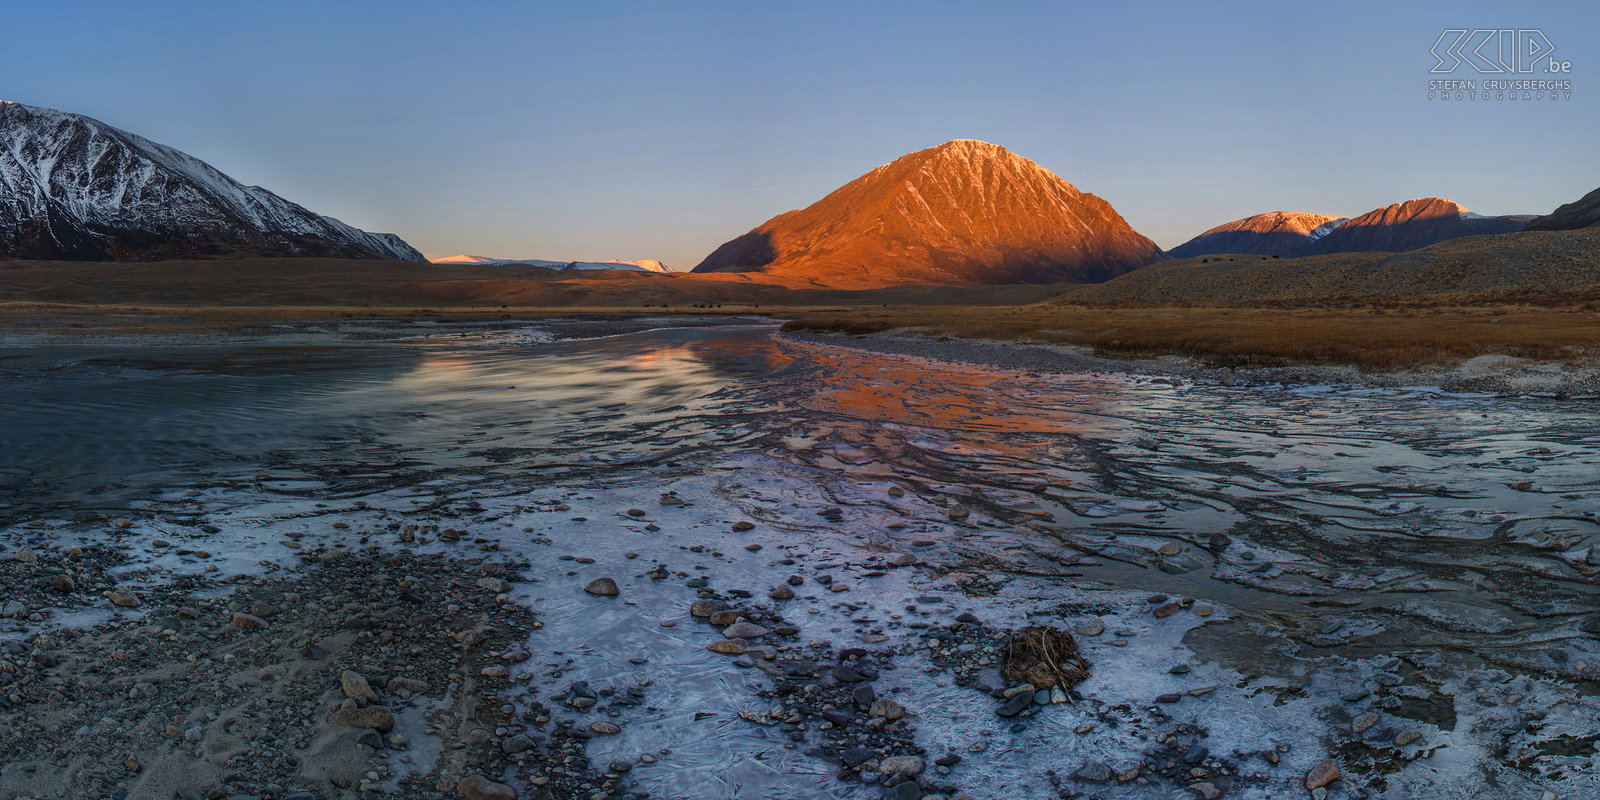 Altai Tavan Bogd - Sunrise Sunrise in the Altai mountains in Mongolia near the border of Russia and China. I woke up early to make some long exposure shots of the river and the drifting ice. The mountains got a fantastic warm orange color but the magic light only lasted for 5 minutes. Stefan Cruysberghs